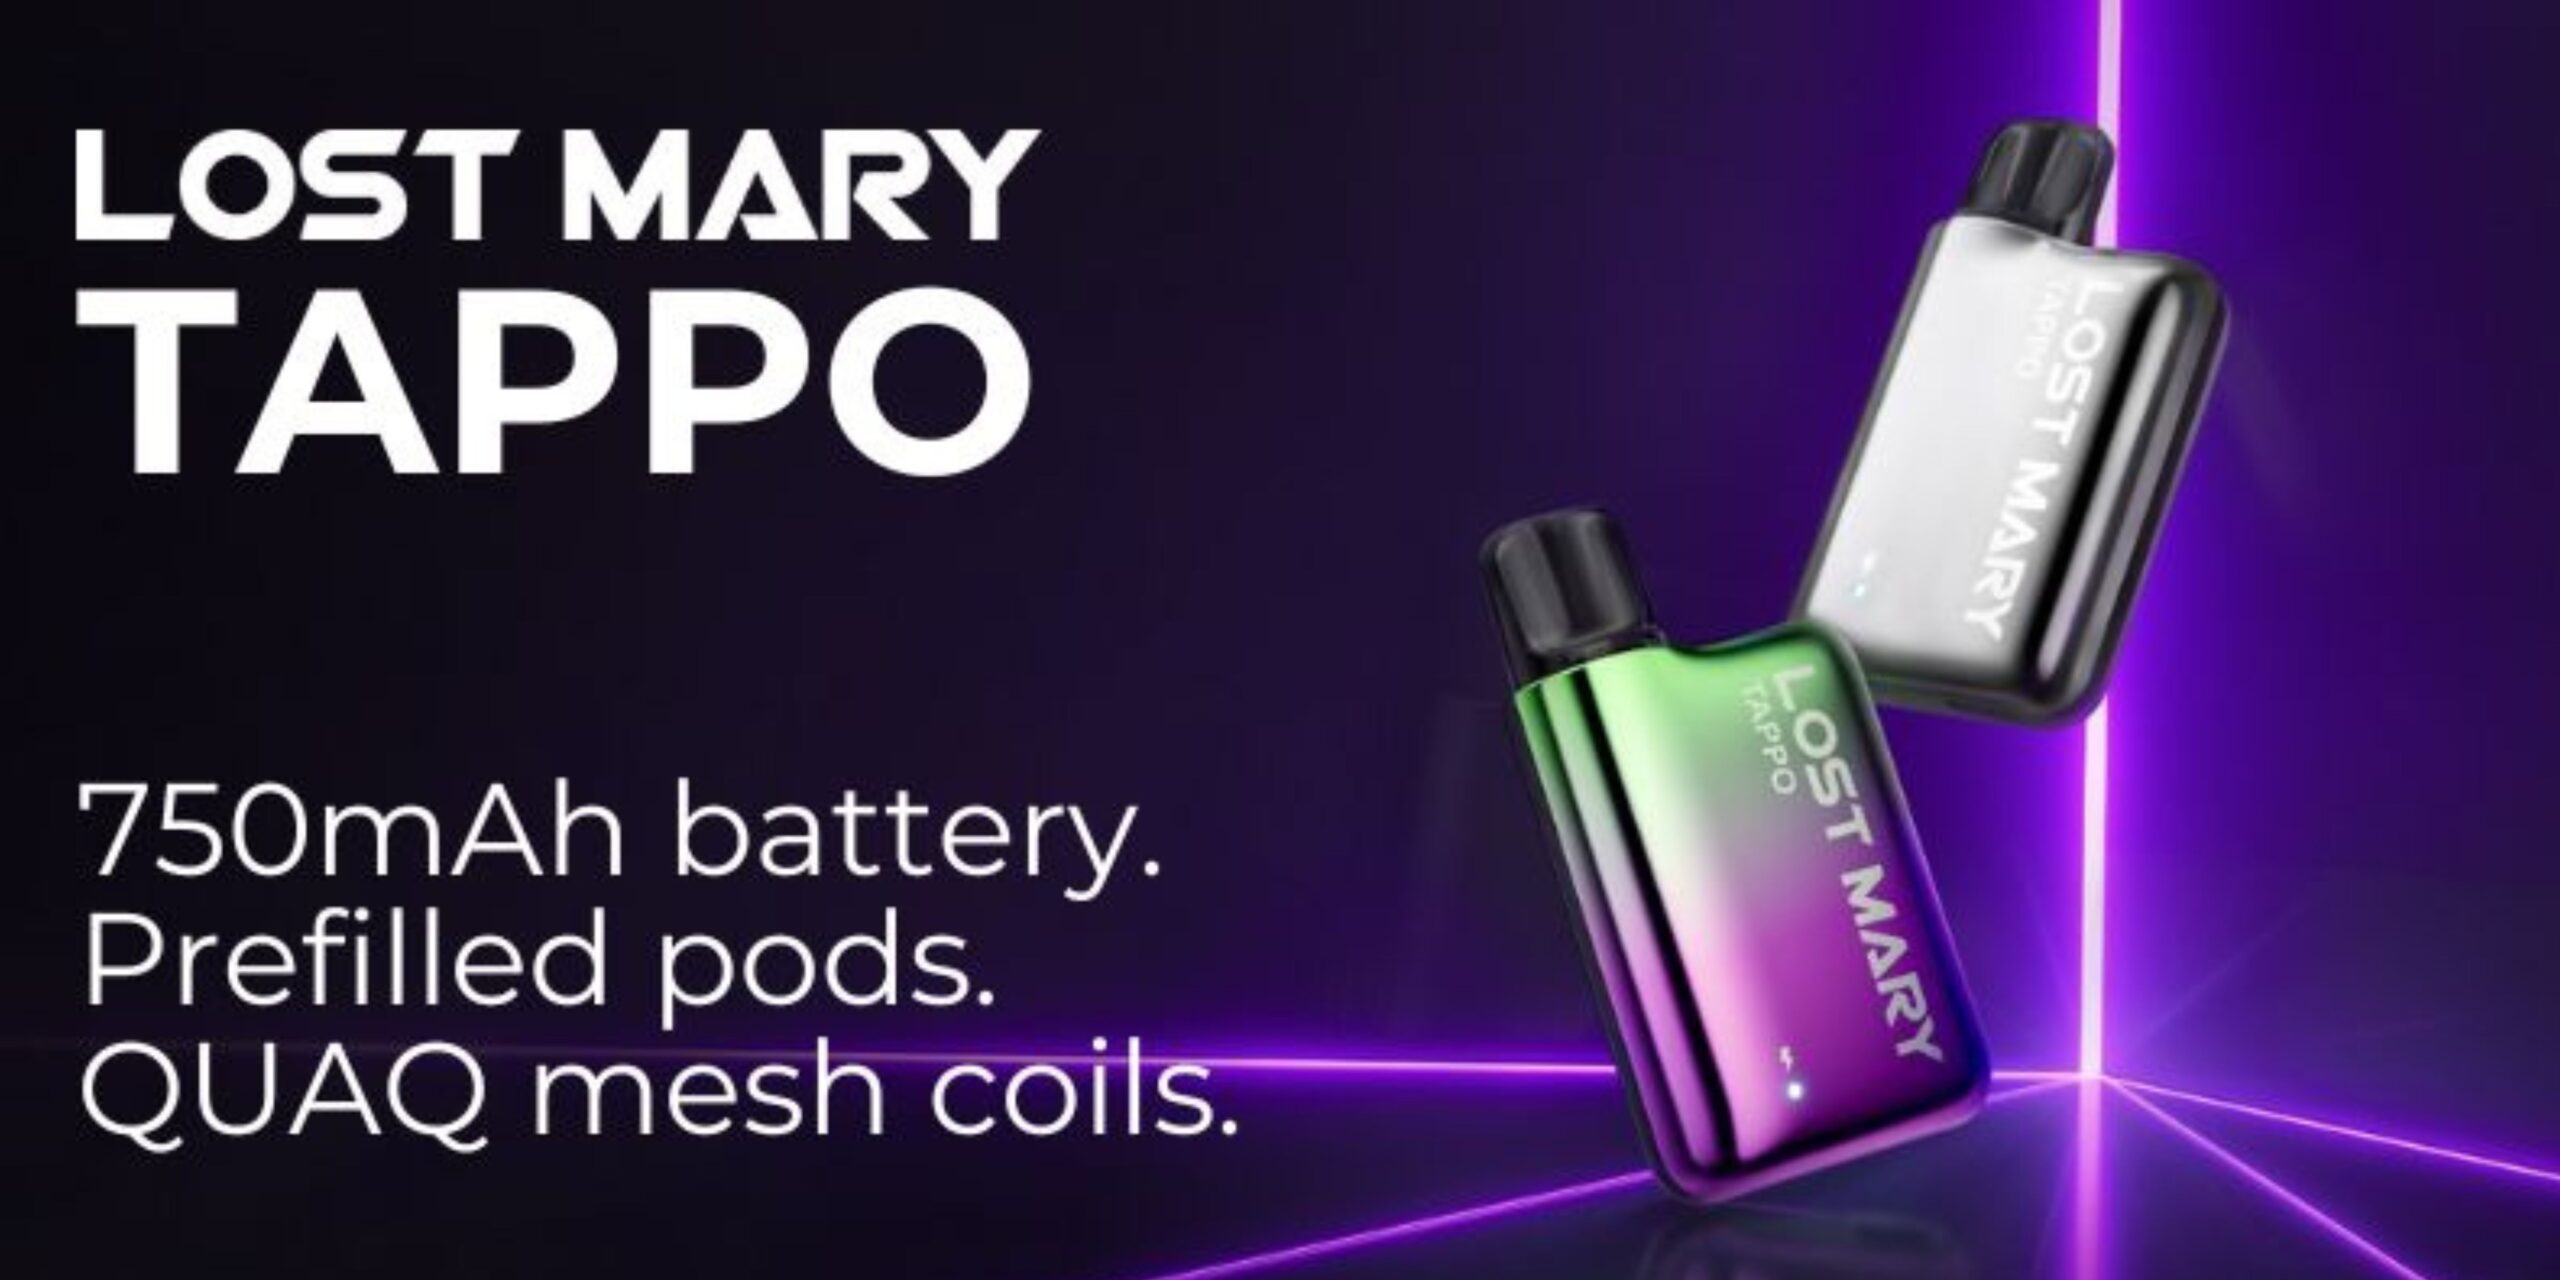 LOST MARY TAPPO – Lemon Lime (Replacement Prefilled Pods) VAPING - XMANIA Ireland 14